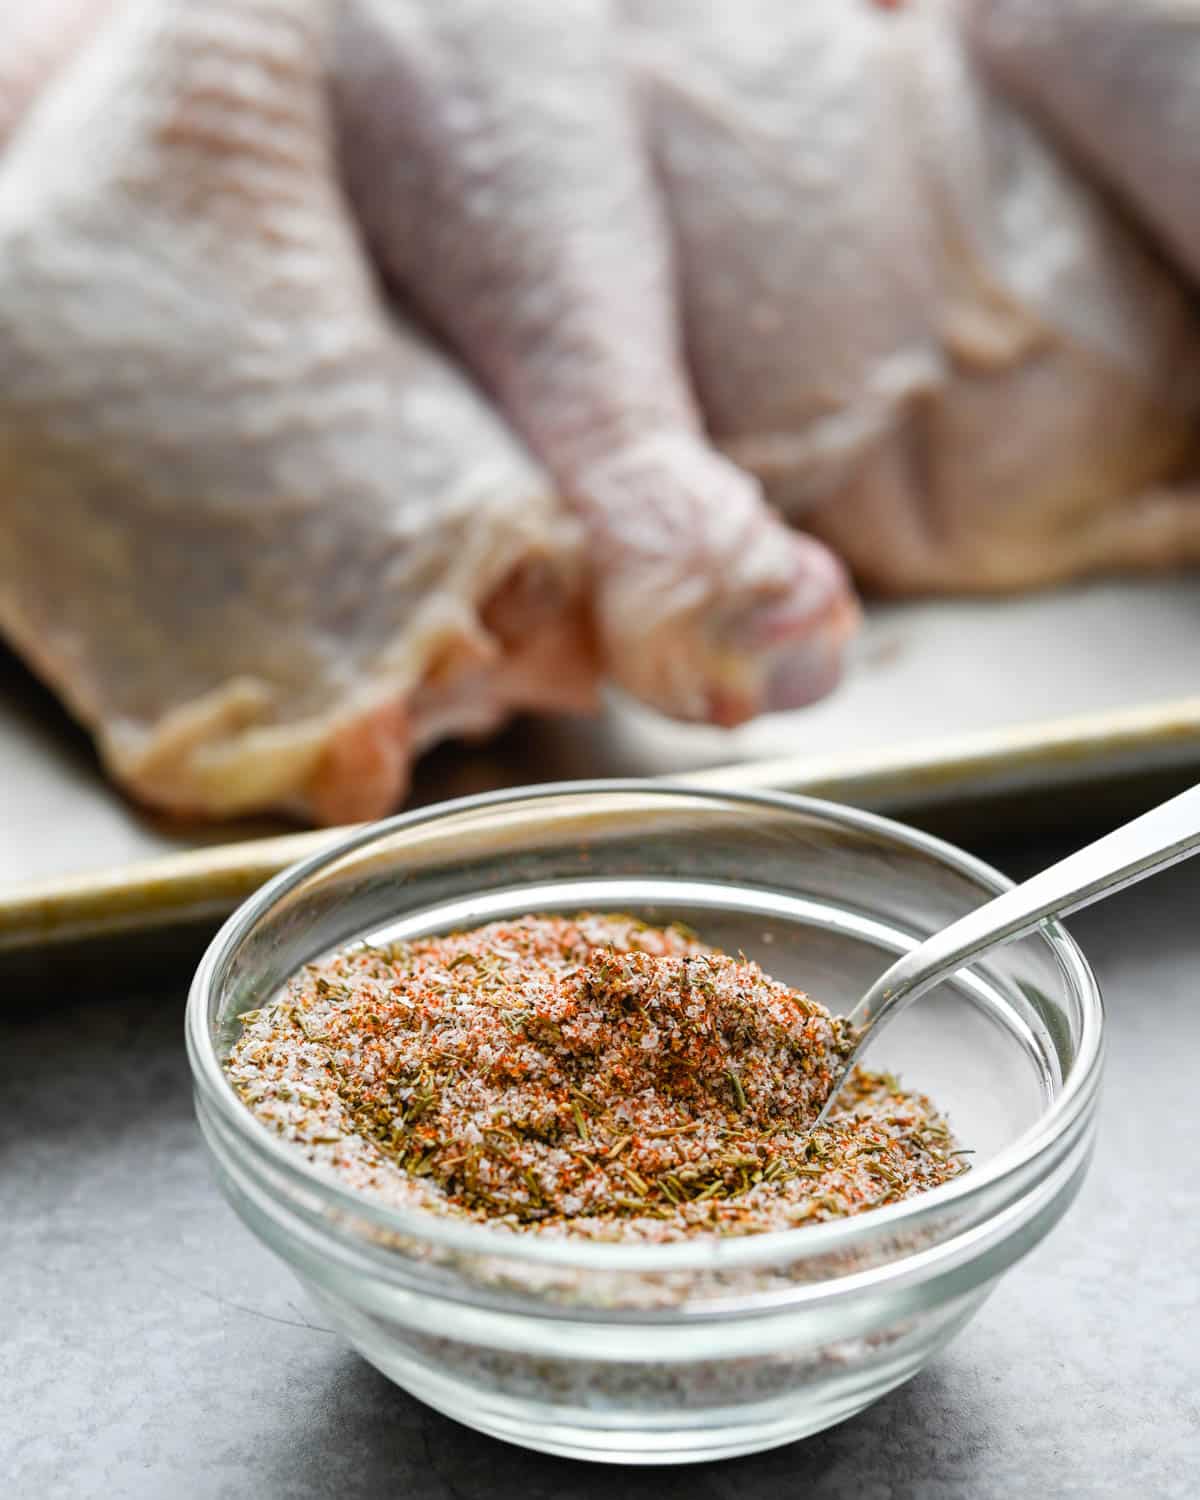 The dry rub for the turkey.